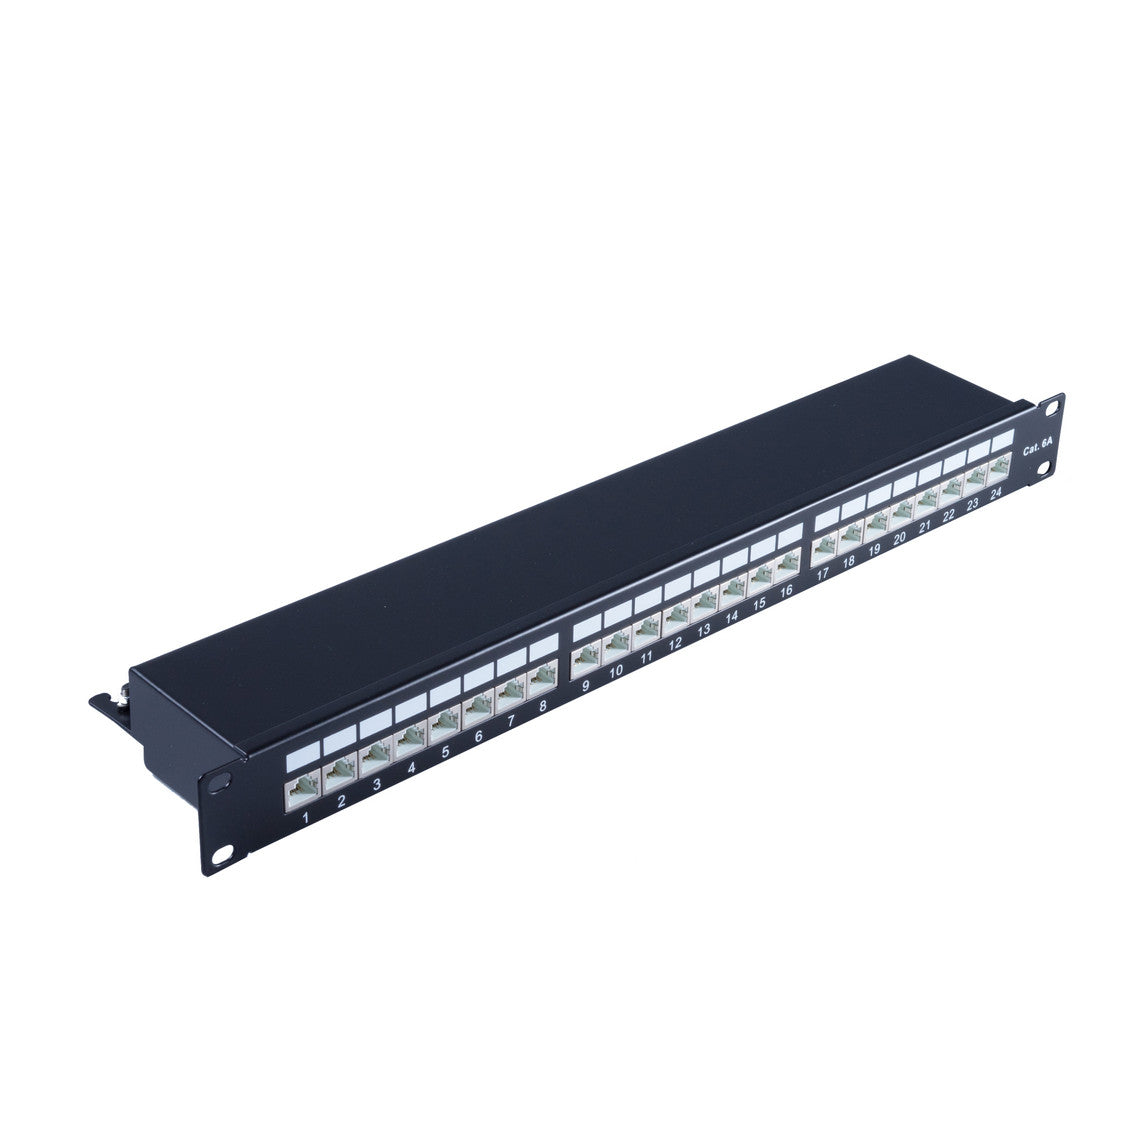 cat 6A 19" 1HE-Patchpanel, schwarz